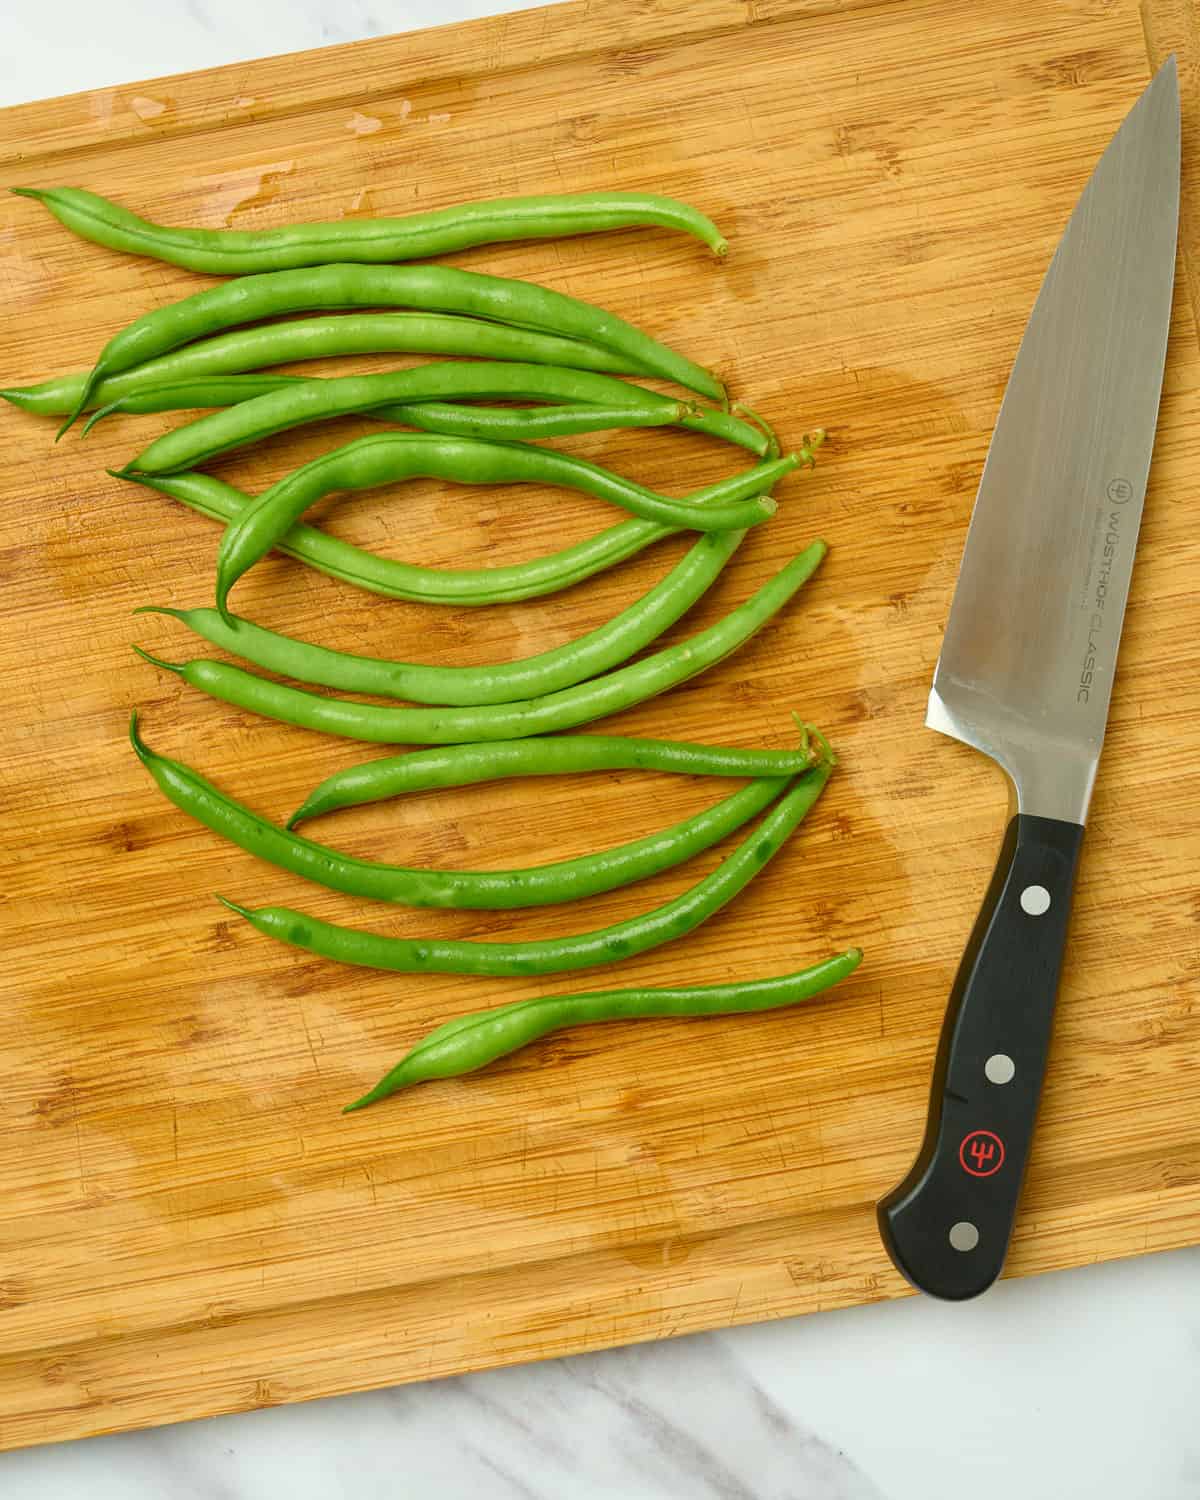 Green beans on a cutting board with a knife.